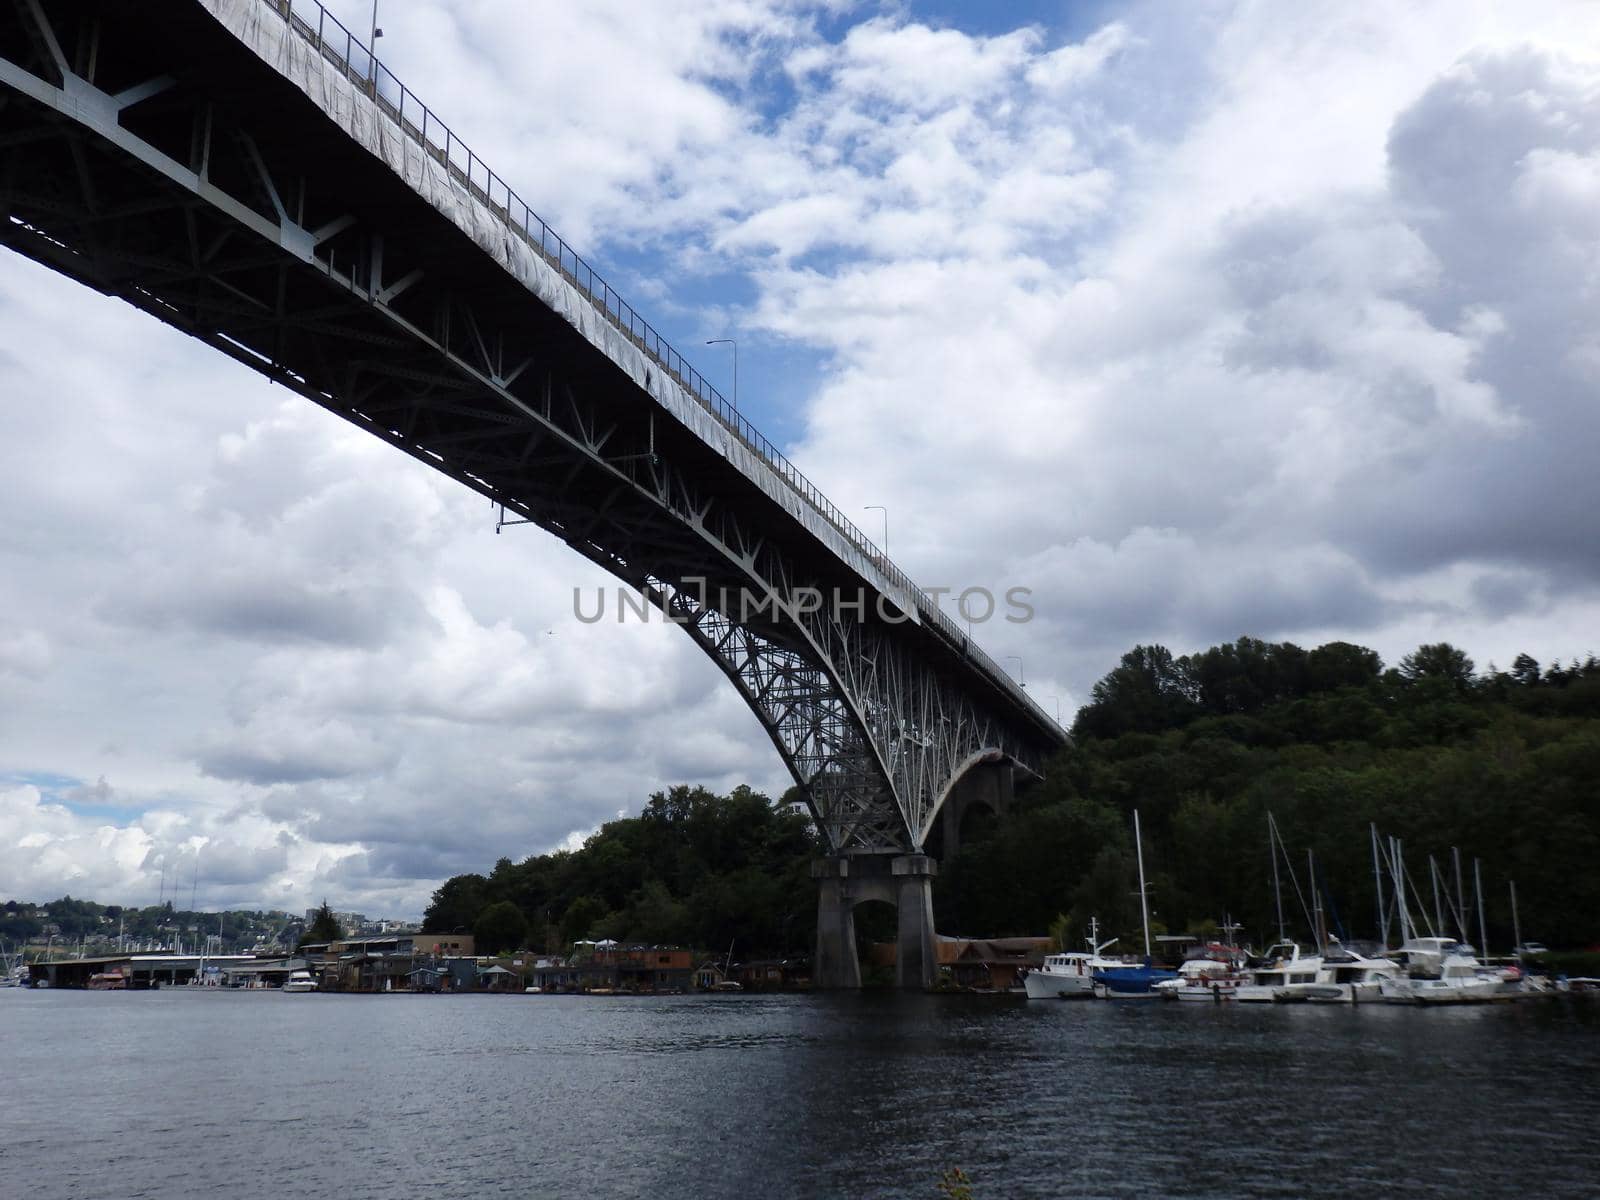 Aurora Bridge, under repair, towers over Union Lake with boats lining the shore in Seattle, Washington.